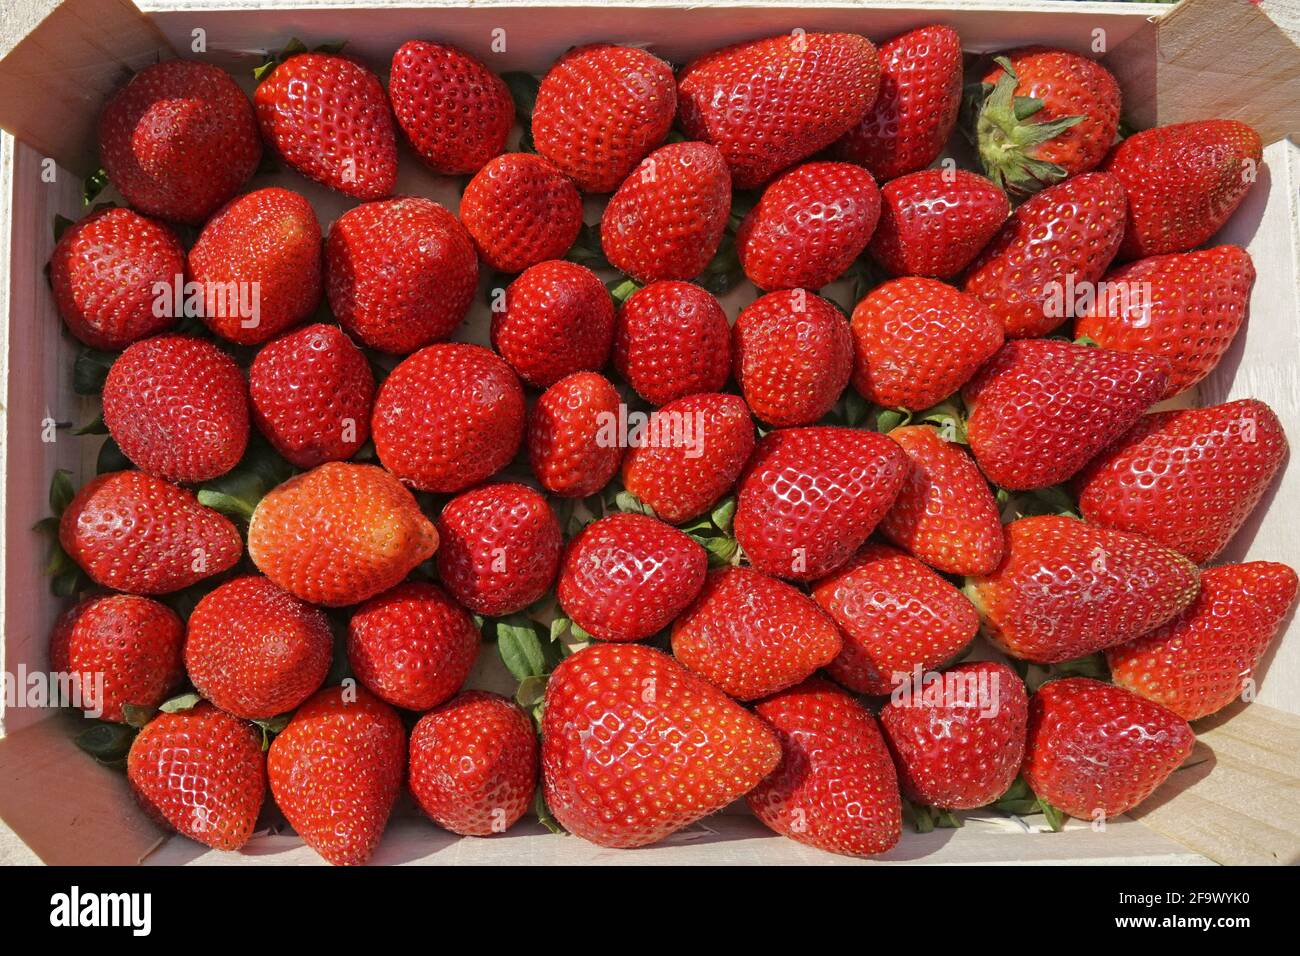 A wooden box filled with strawberries Stock Photo